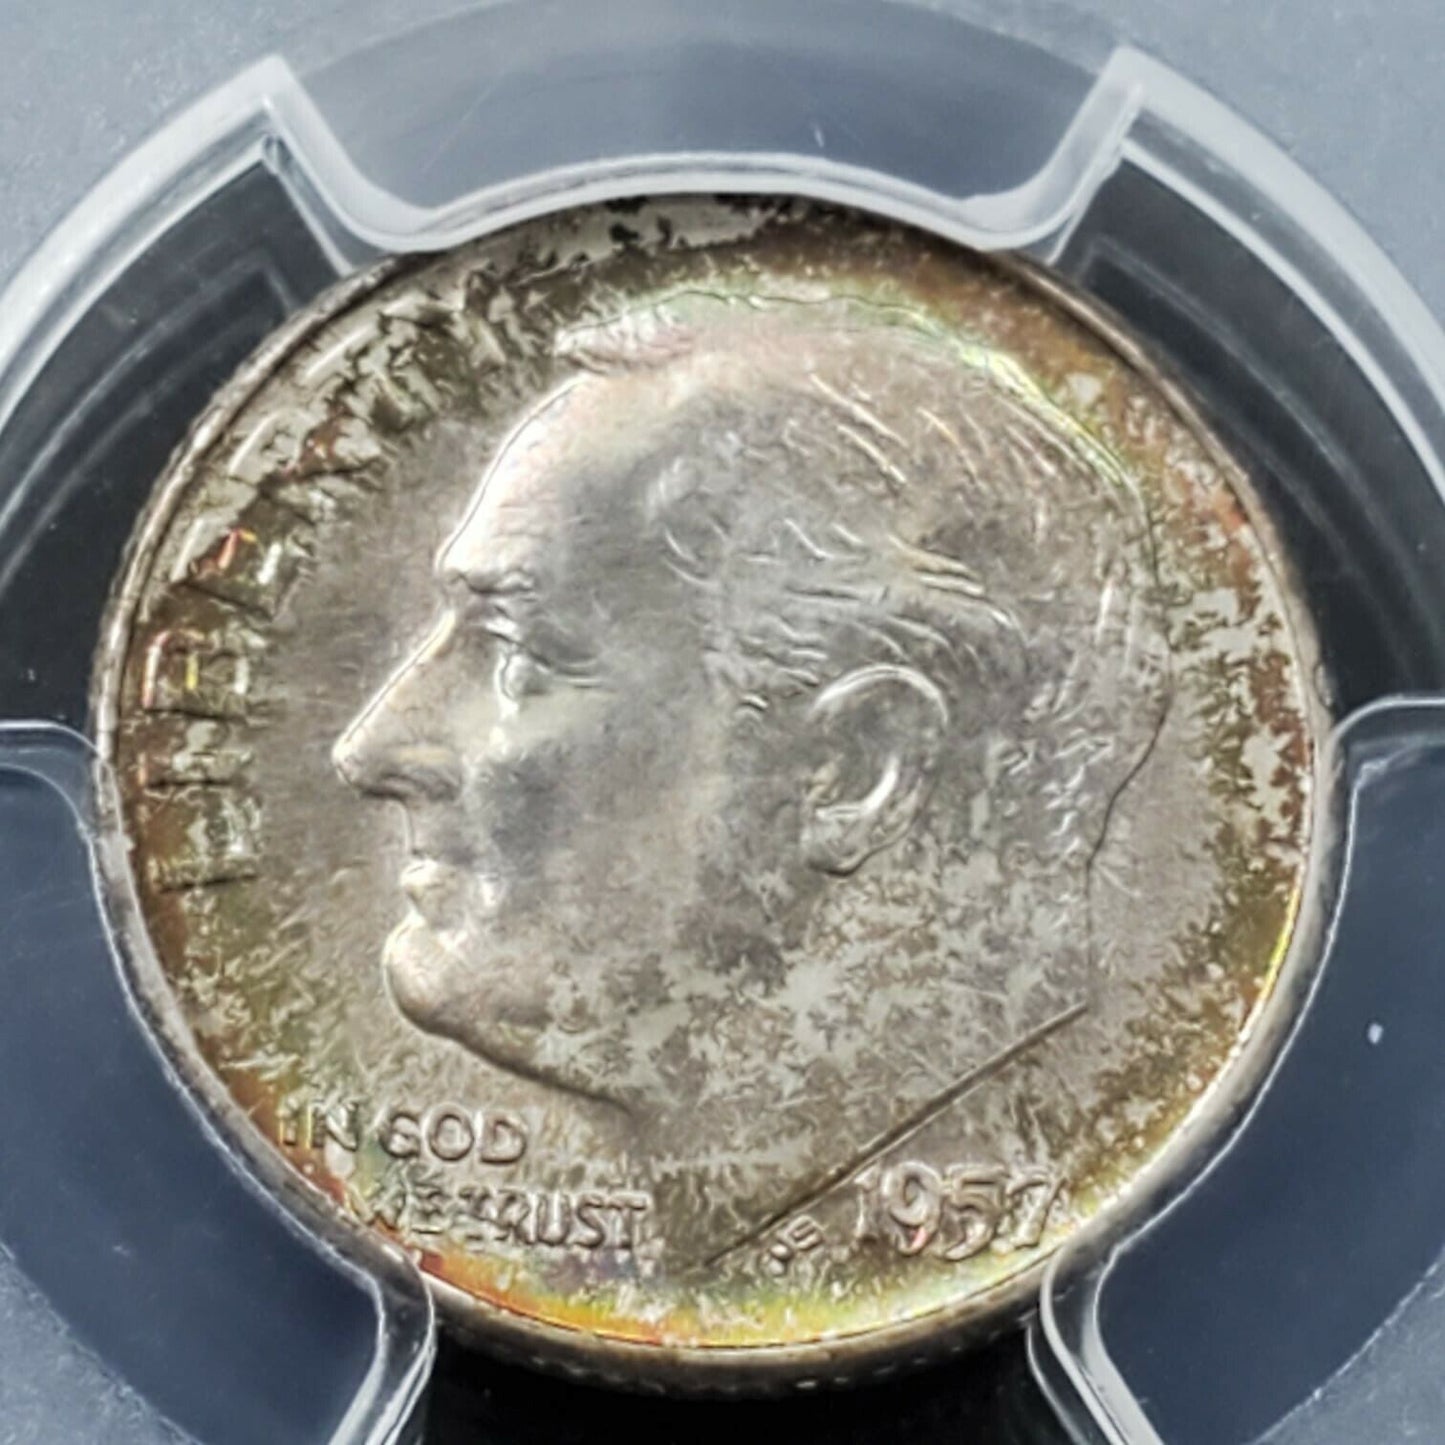 1957 D Roosevelt 10c Silver Dime Coin PCGS MS66 PQ * Rainbow Toning Obverse Tone